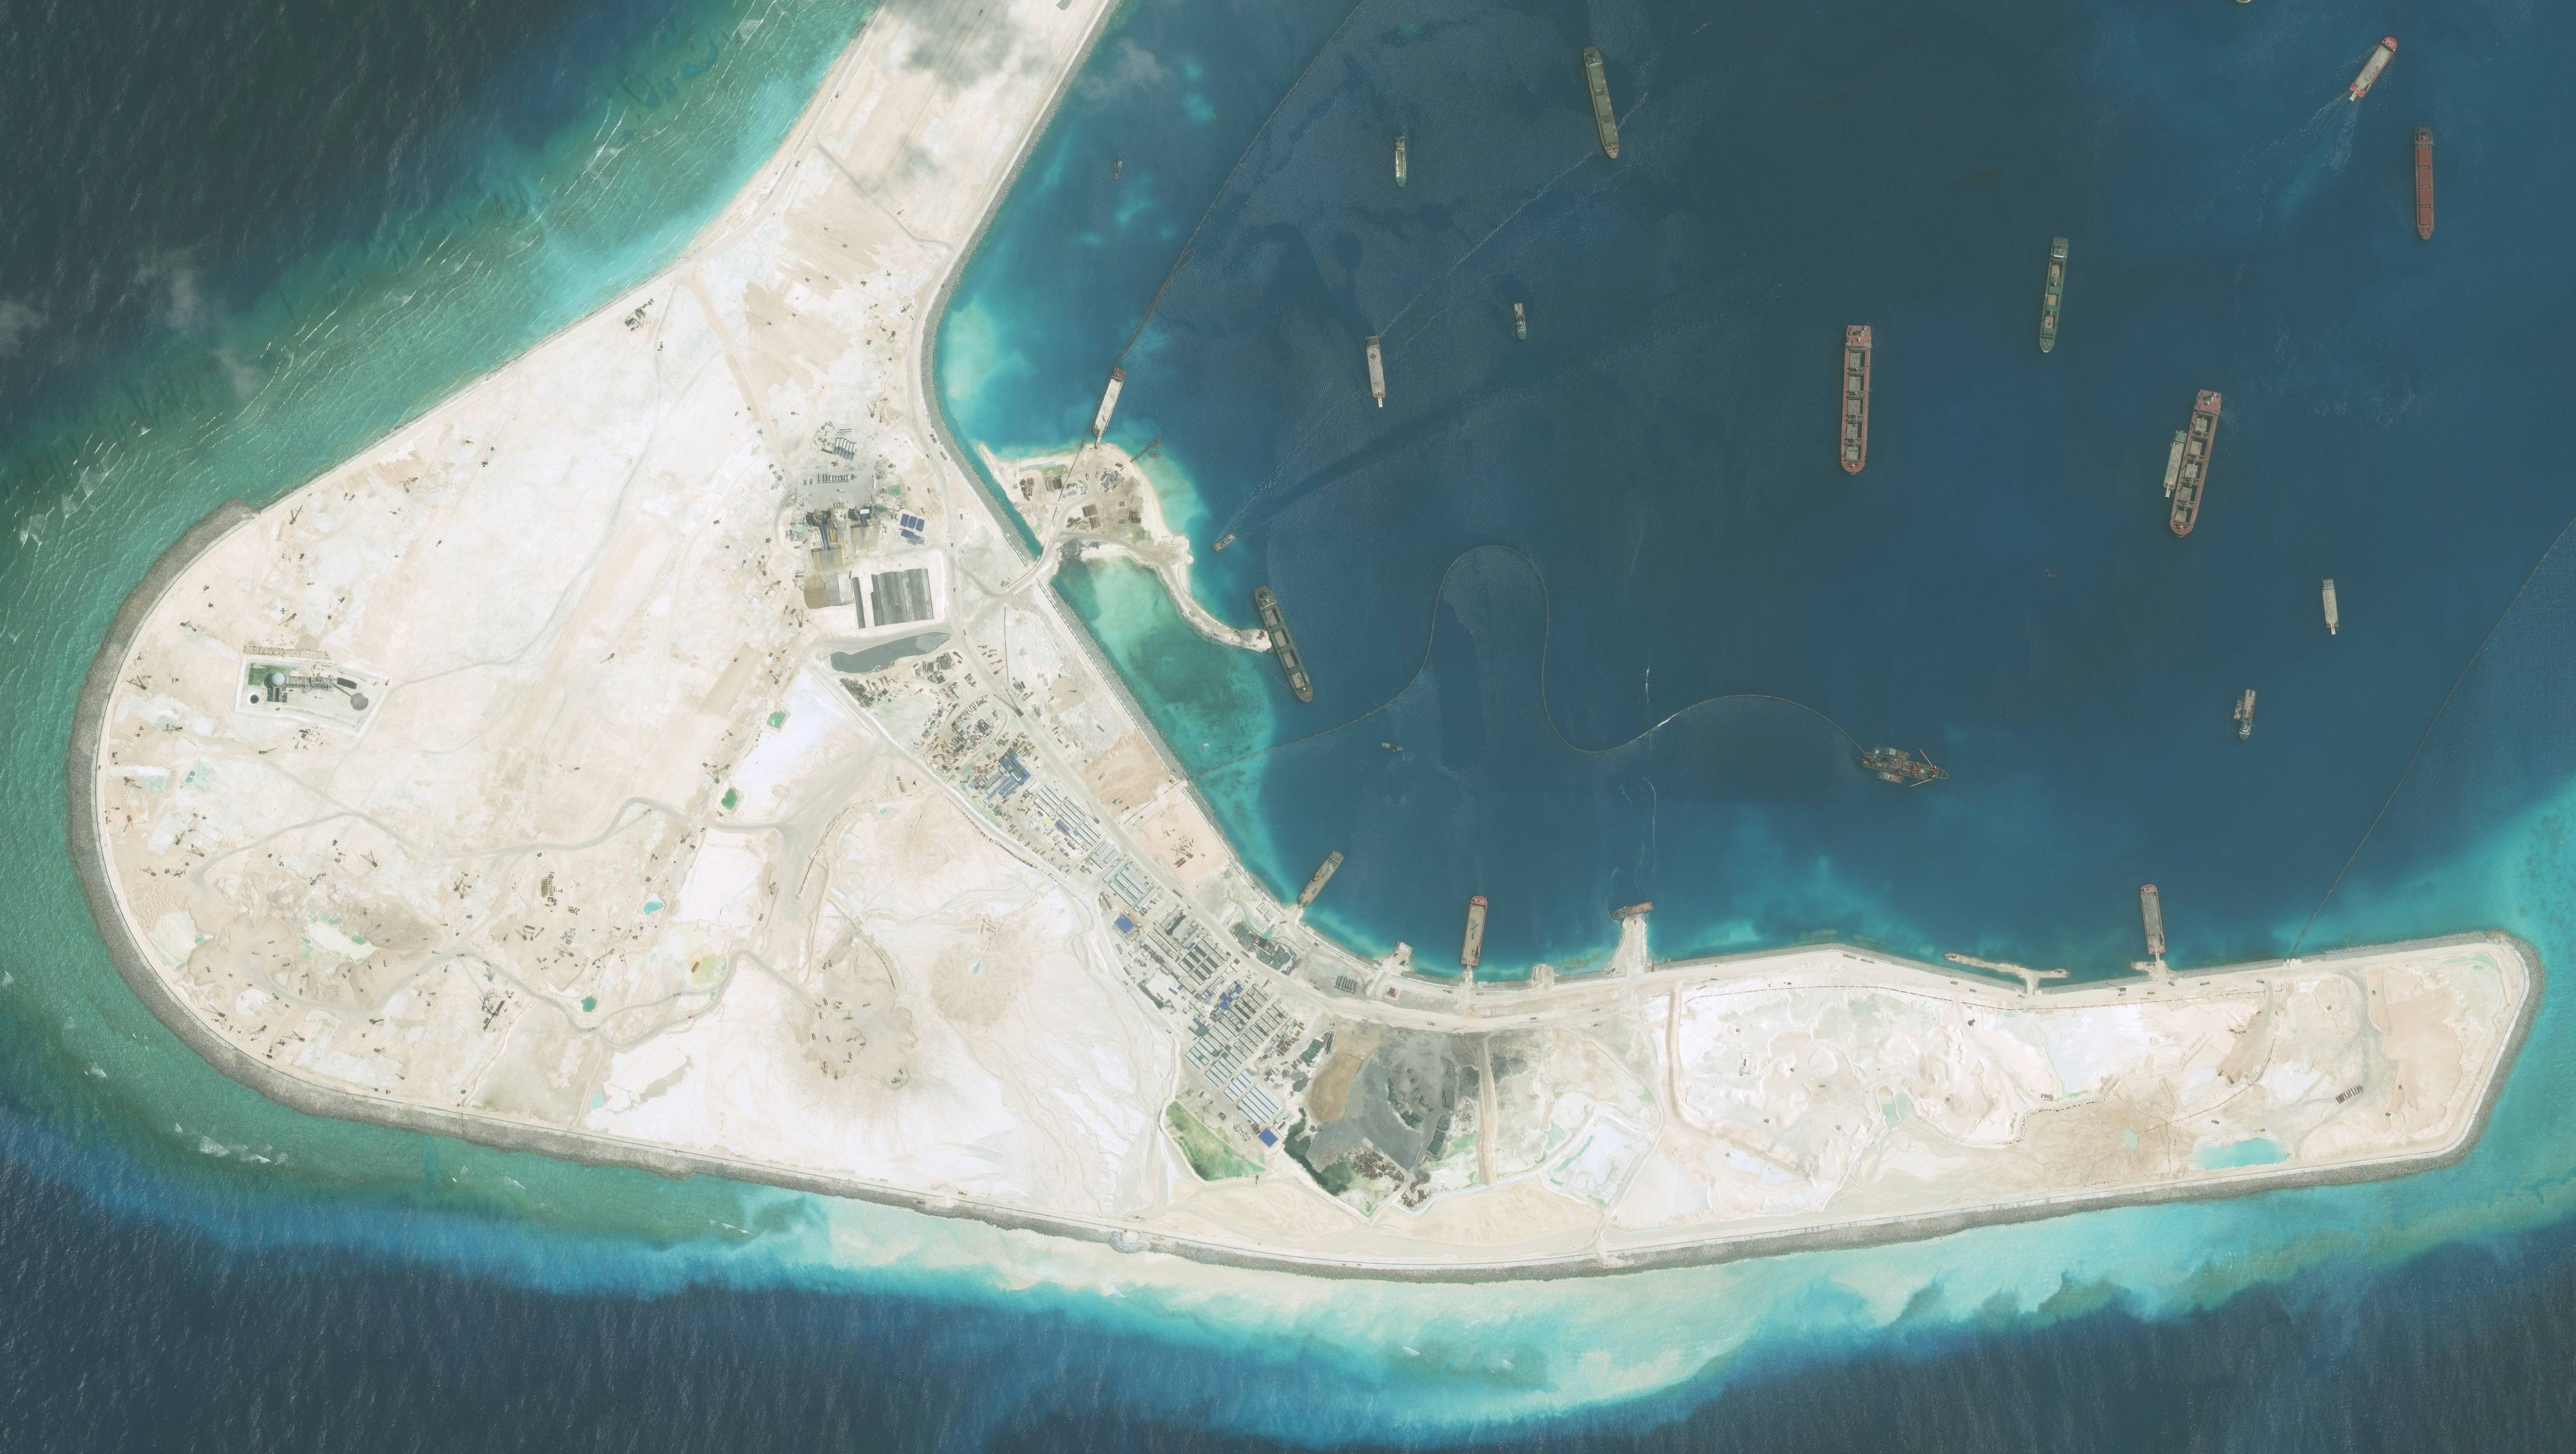 The Subi Reef in the South China Sea, a part of the Spratly Islands group, on Sept. 1, 2015 (DigitalGlobe/ScapeWare3d—DigitalGlobe/Getty Images)